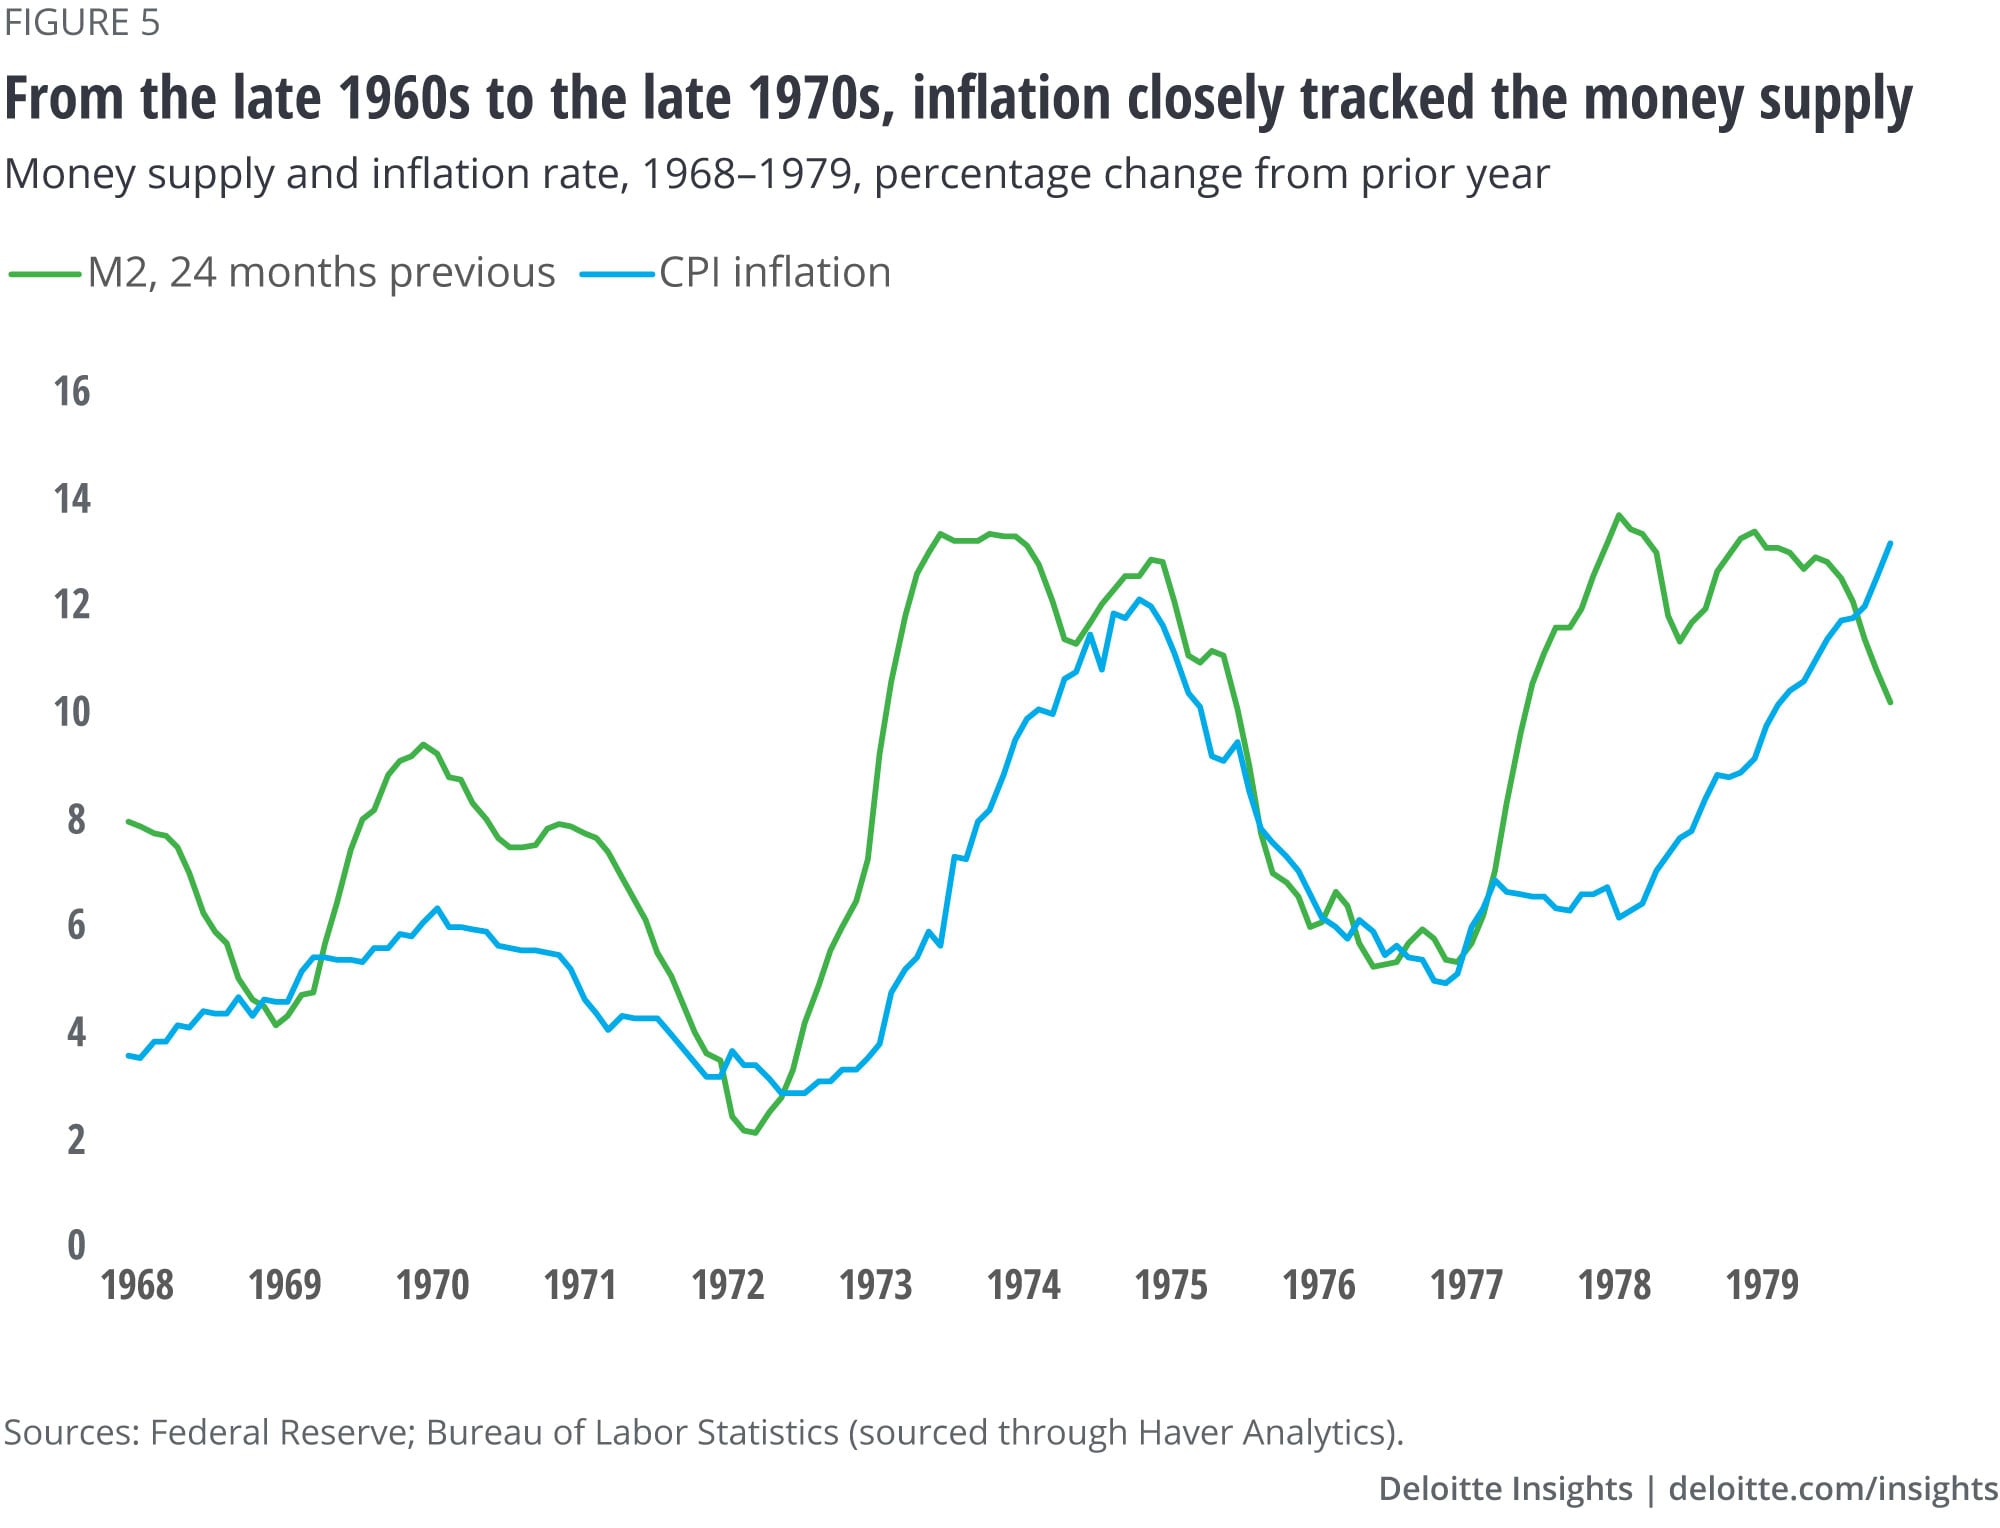 From the late 1960s to the late 1970s, inflation closely tracked the money supply